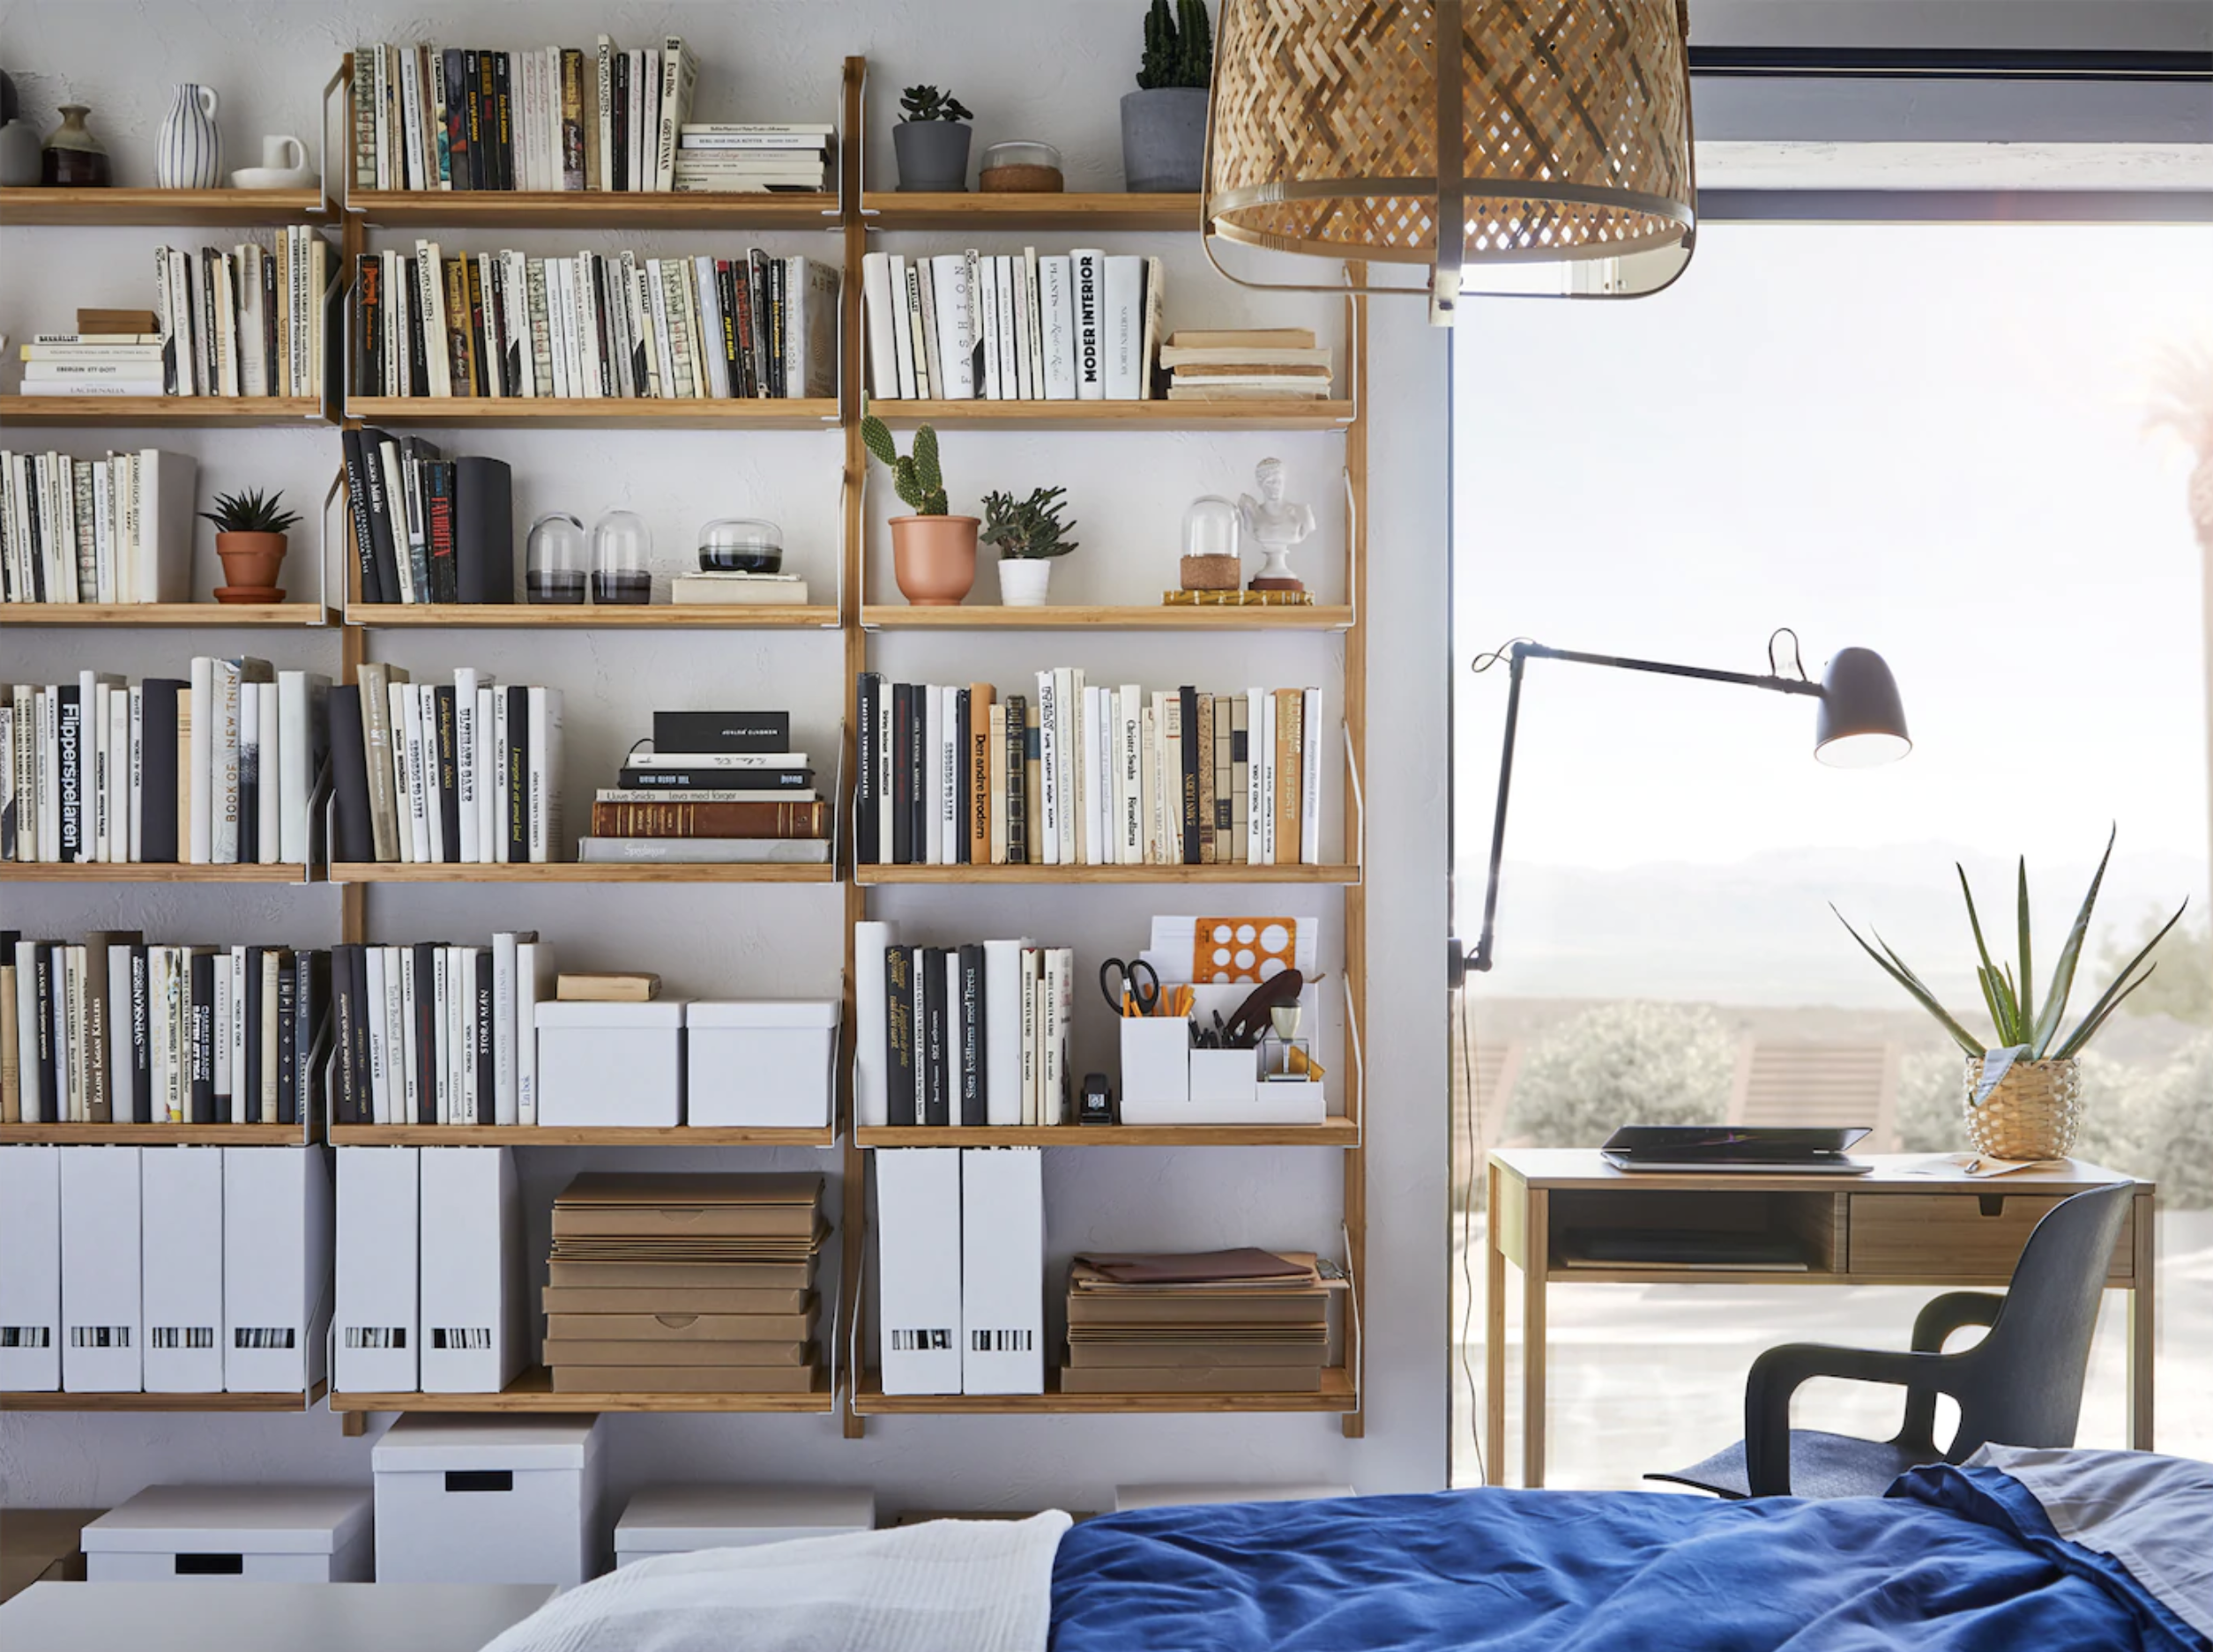 How To Create A Bookshelf Wall Real Homes, How To Build A Built In Bookcase Into Wall